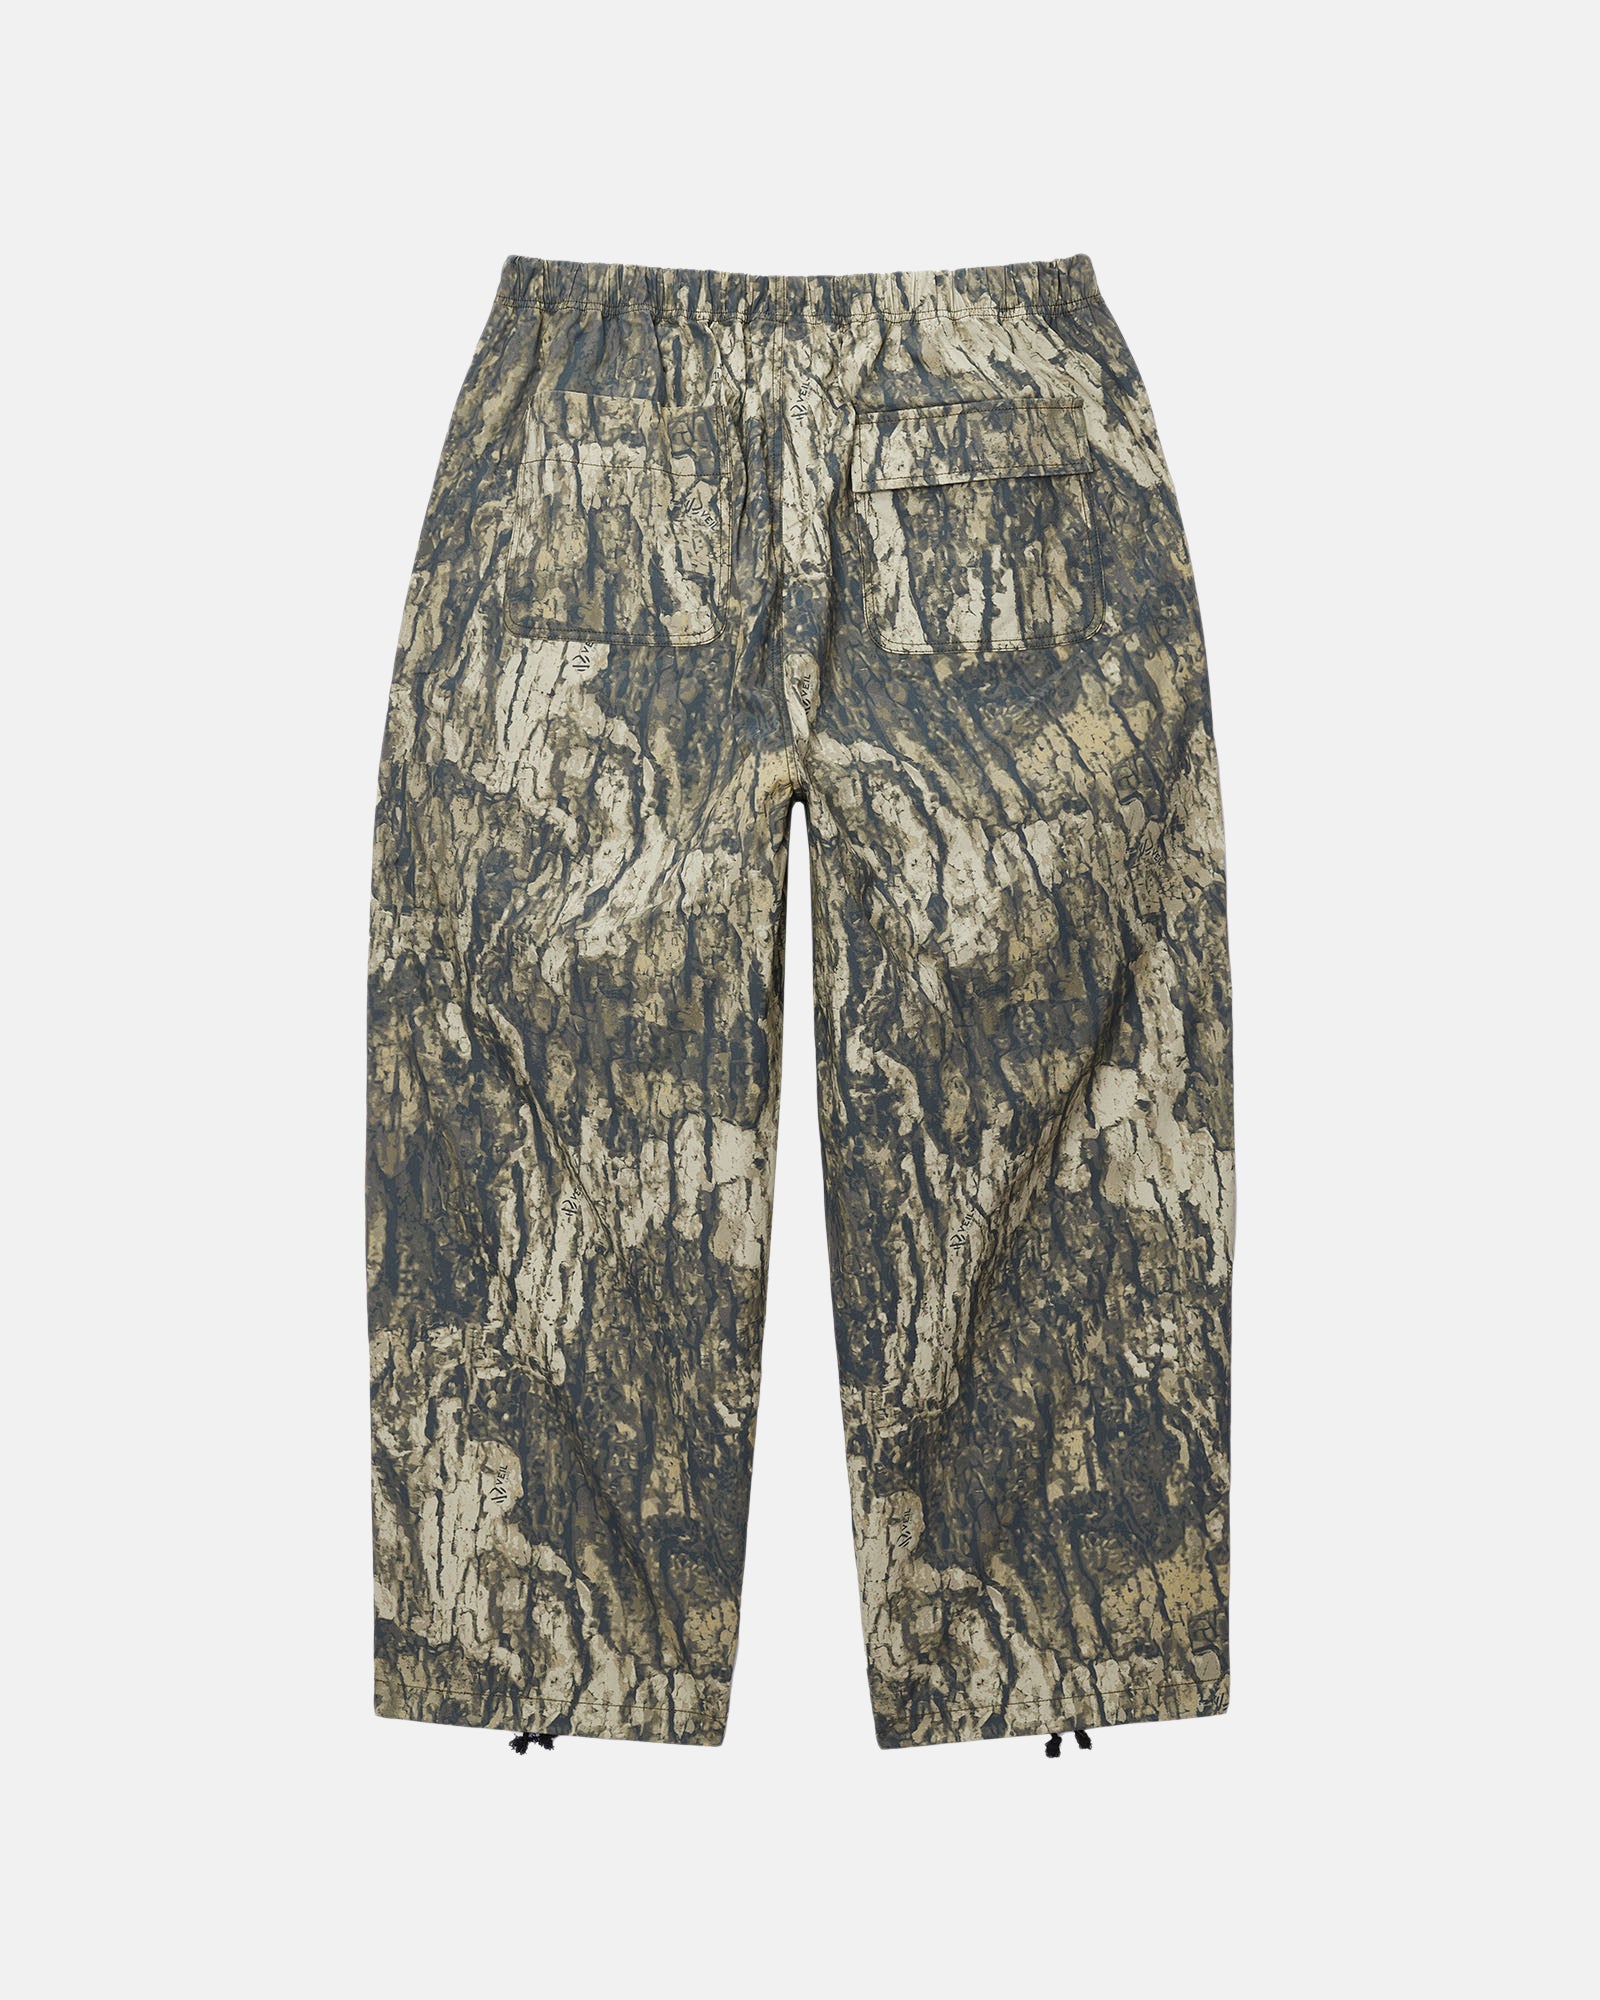 Stussy NYCO OVER TROUSERS S 23aw ステューシー - ワークパンツ ...